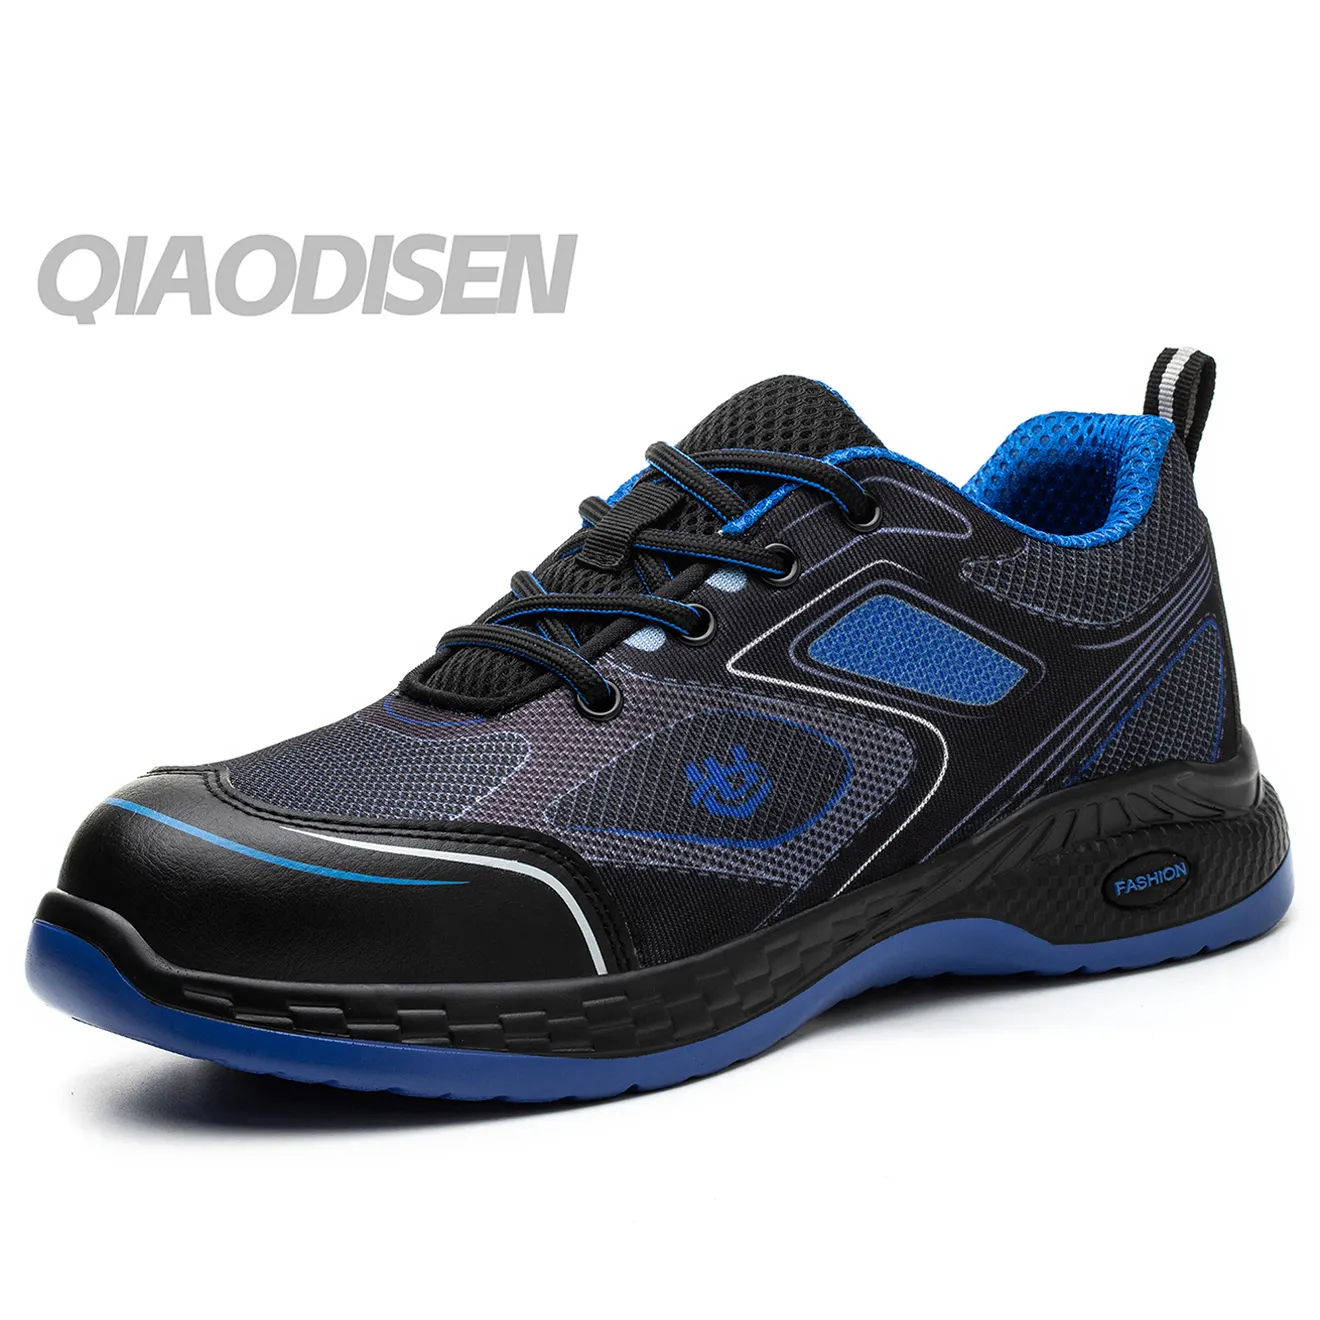 Smash-proof puncture-proof soft breathable odor-proof safety shoes